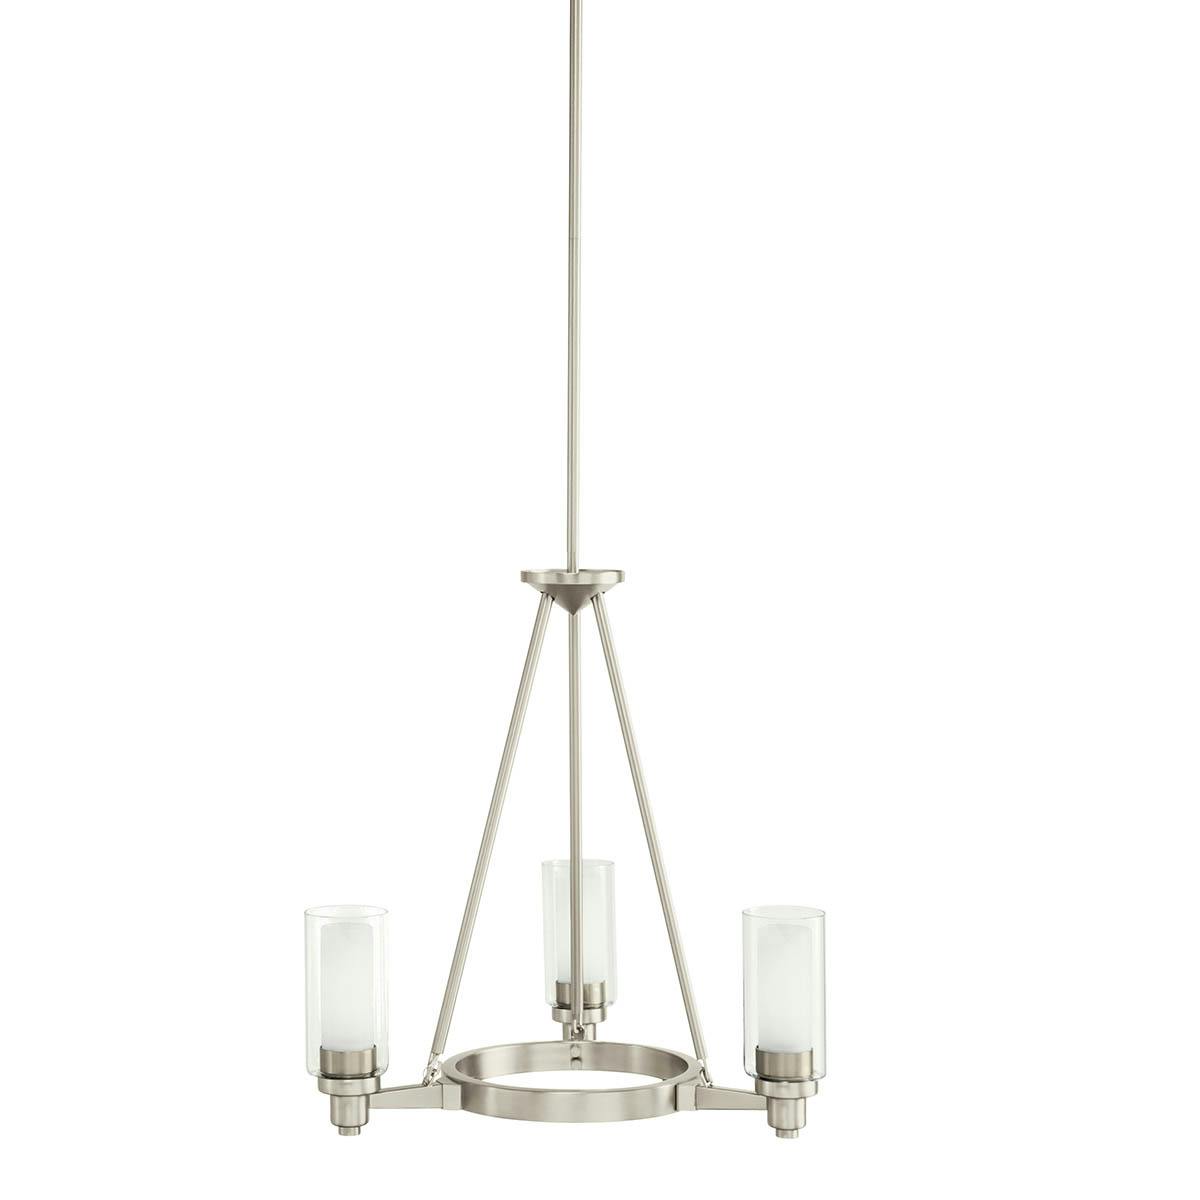 Circolo 3 Light Chandelier Brushed Nickel on a white background